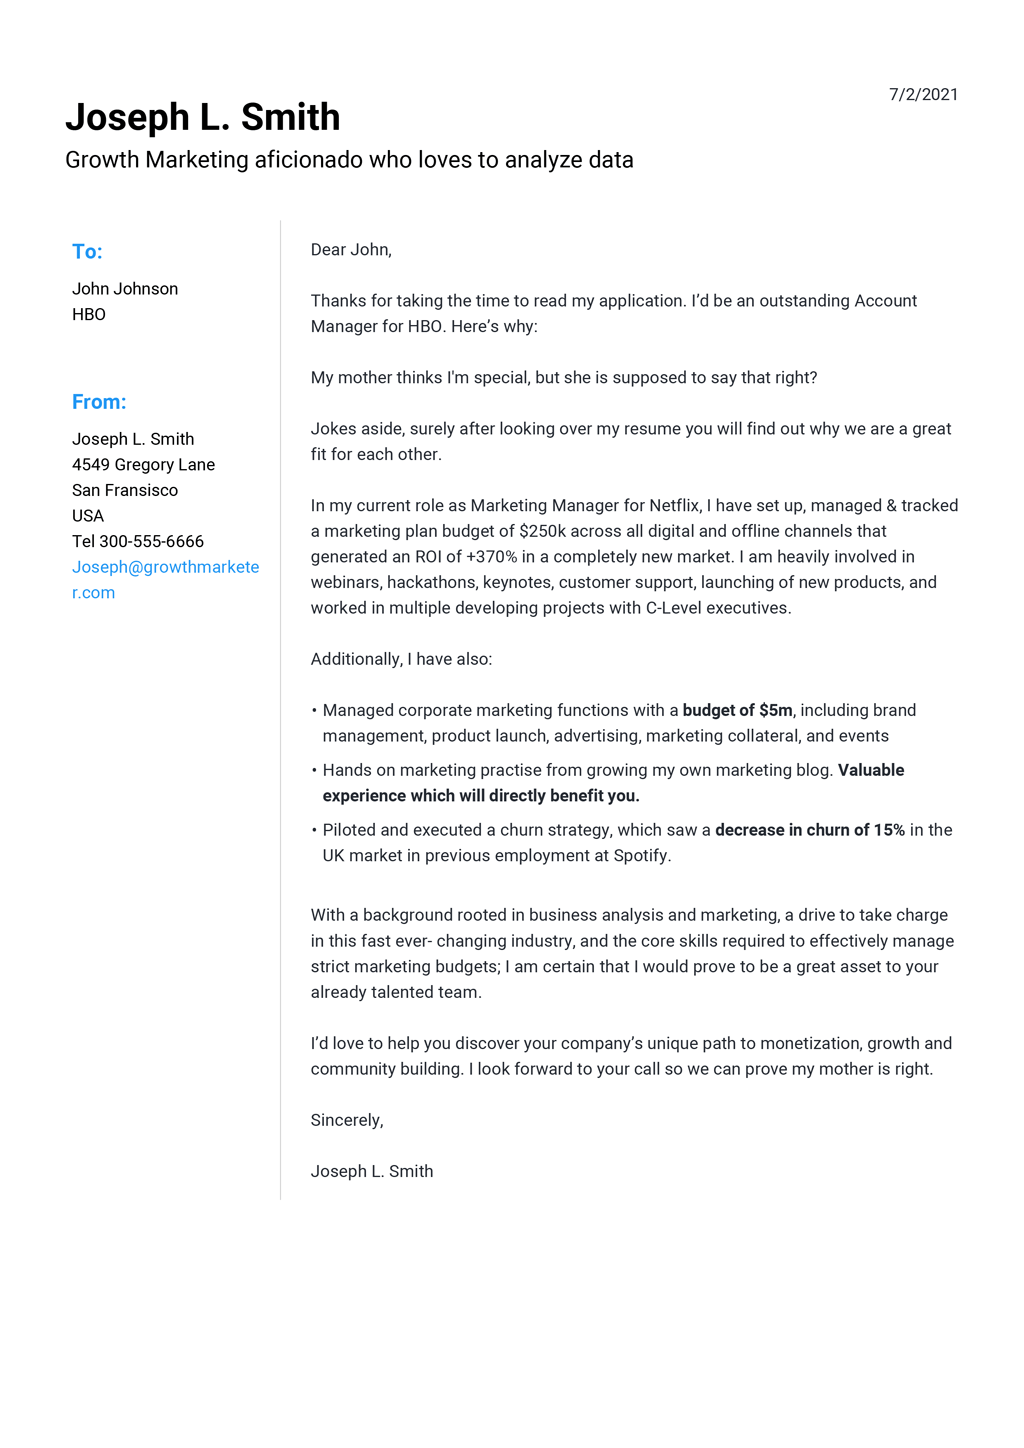 Standard Cover Letter Template from jofibo.com